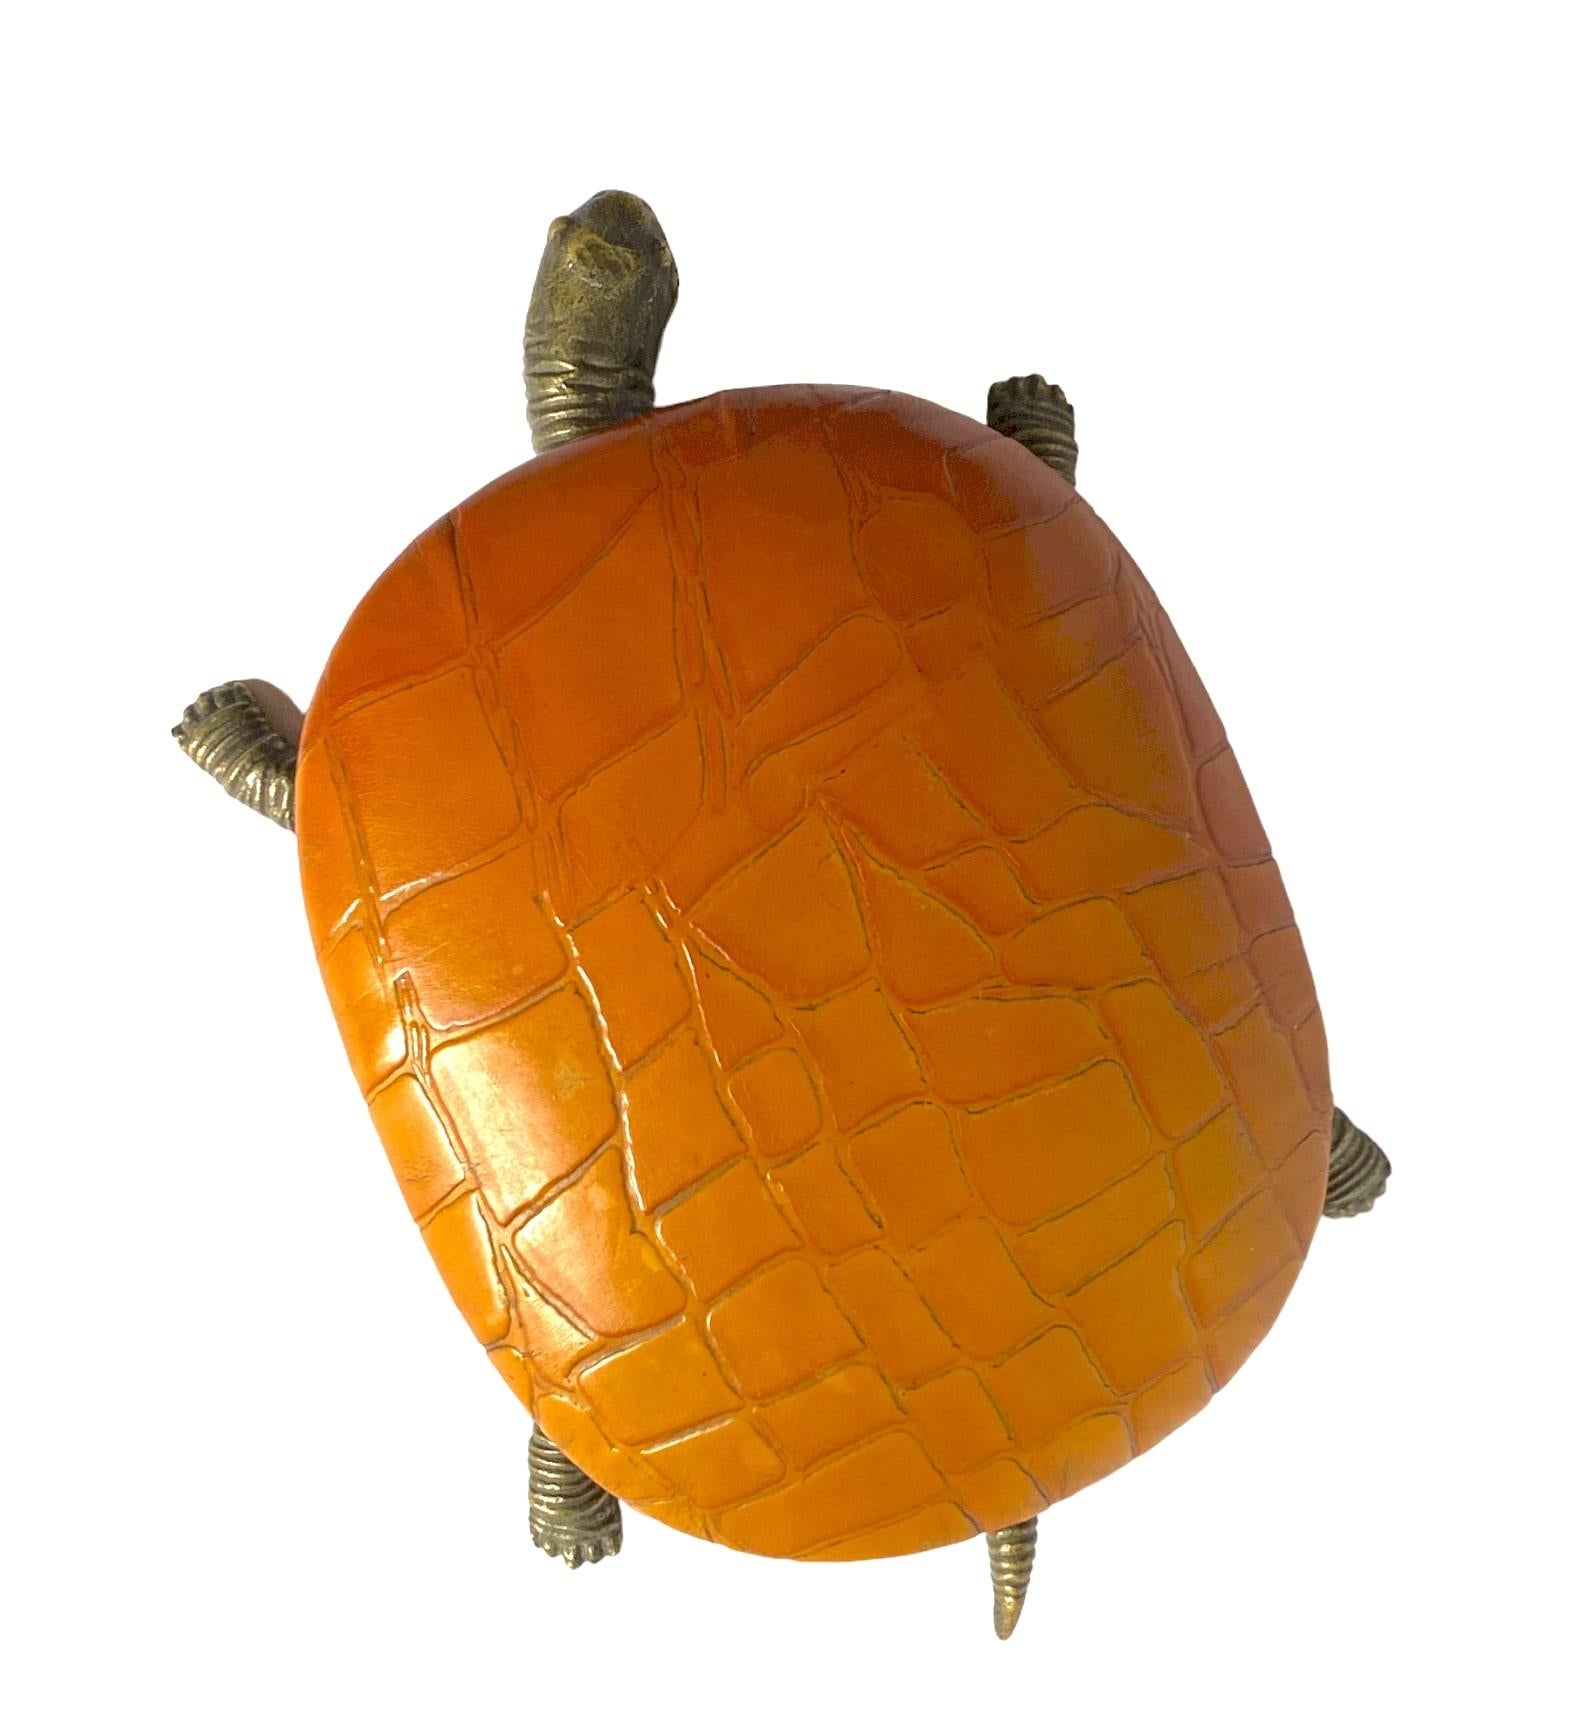 Hollywood regency / midcentury turtle shaped jewelry box.

France 1950s / 1960s

Leather, parchment and bronze

Measures: 38 x 24 x 11 cm.

Marked on the base.

Conditions: excellent consistent with age and use.